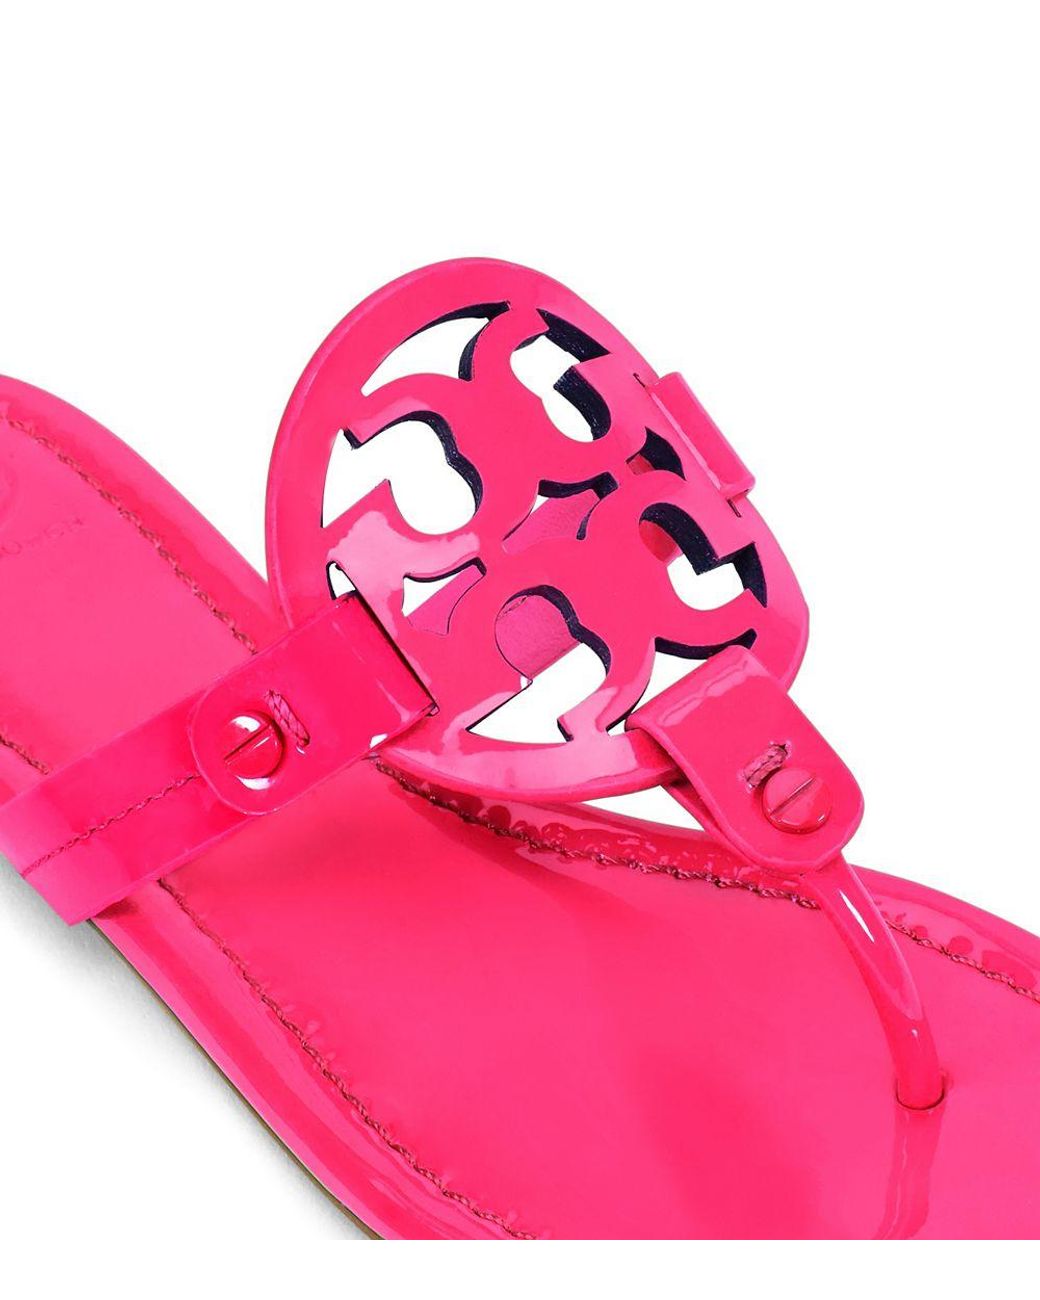 Tory Burch Miller Fluorescent Sandal, Patent Leather in Pink | Lyst